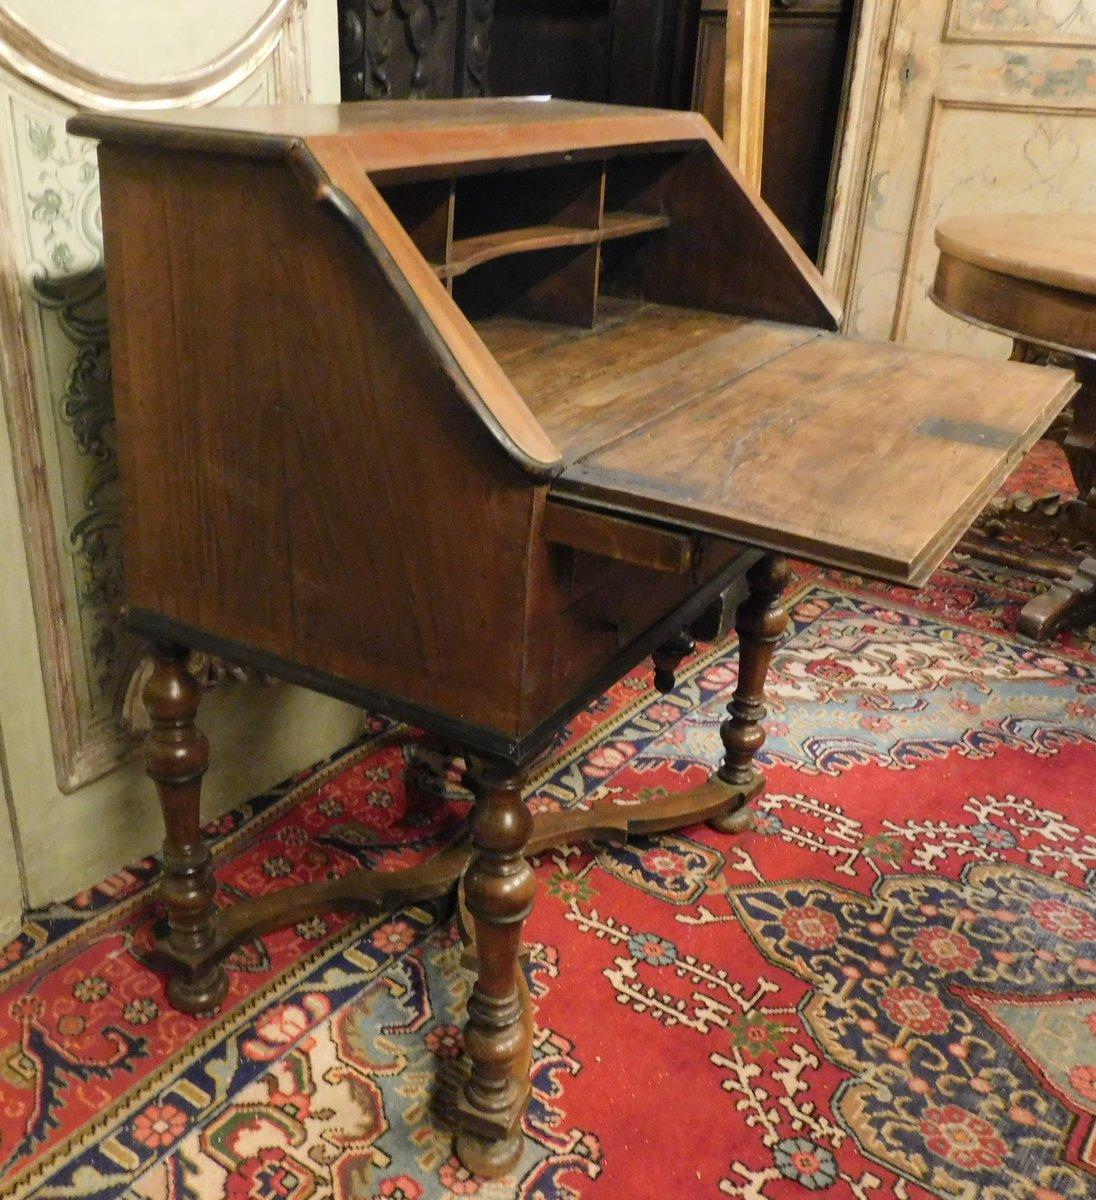 Antique Flap Writing Desk in Walnut, Carved Cross Legs, Early 18th Century Italy For Sale 5